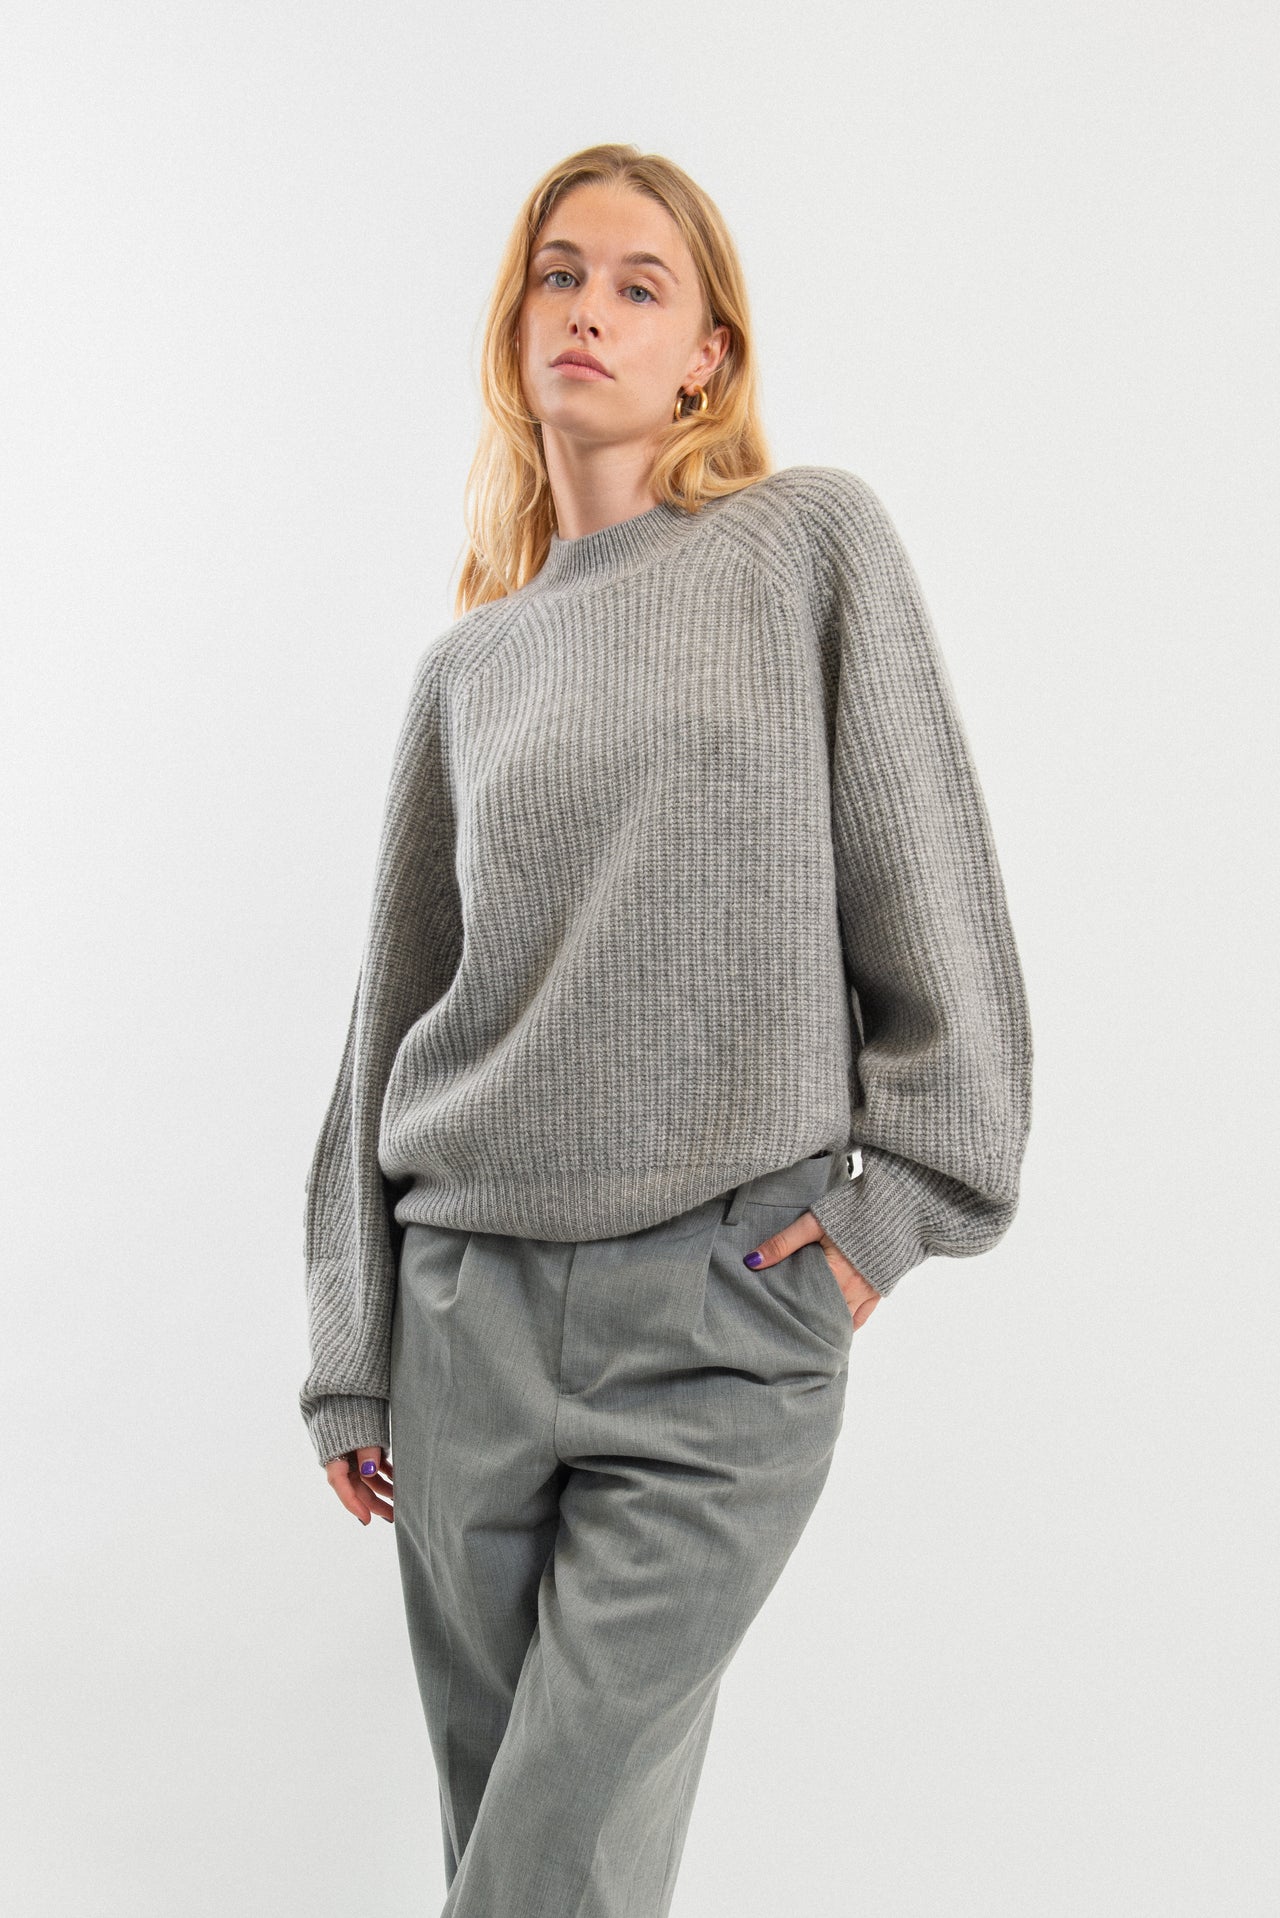 100% Cashmere sweater with a stand up collar and raglan sleeves